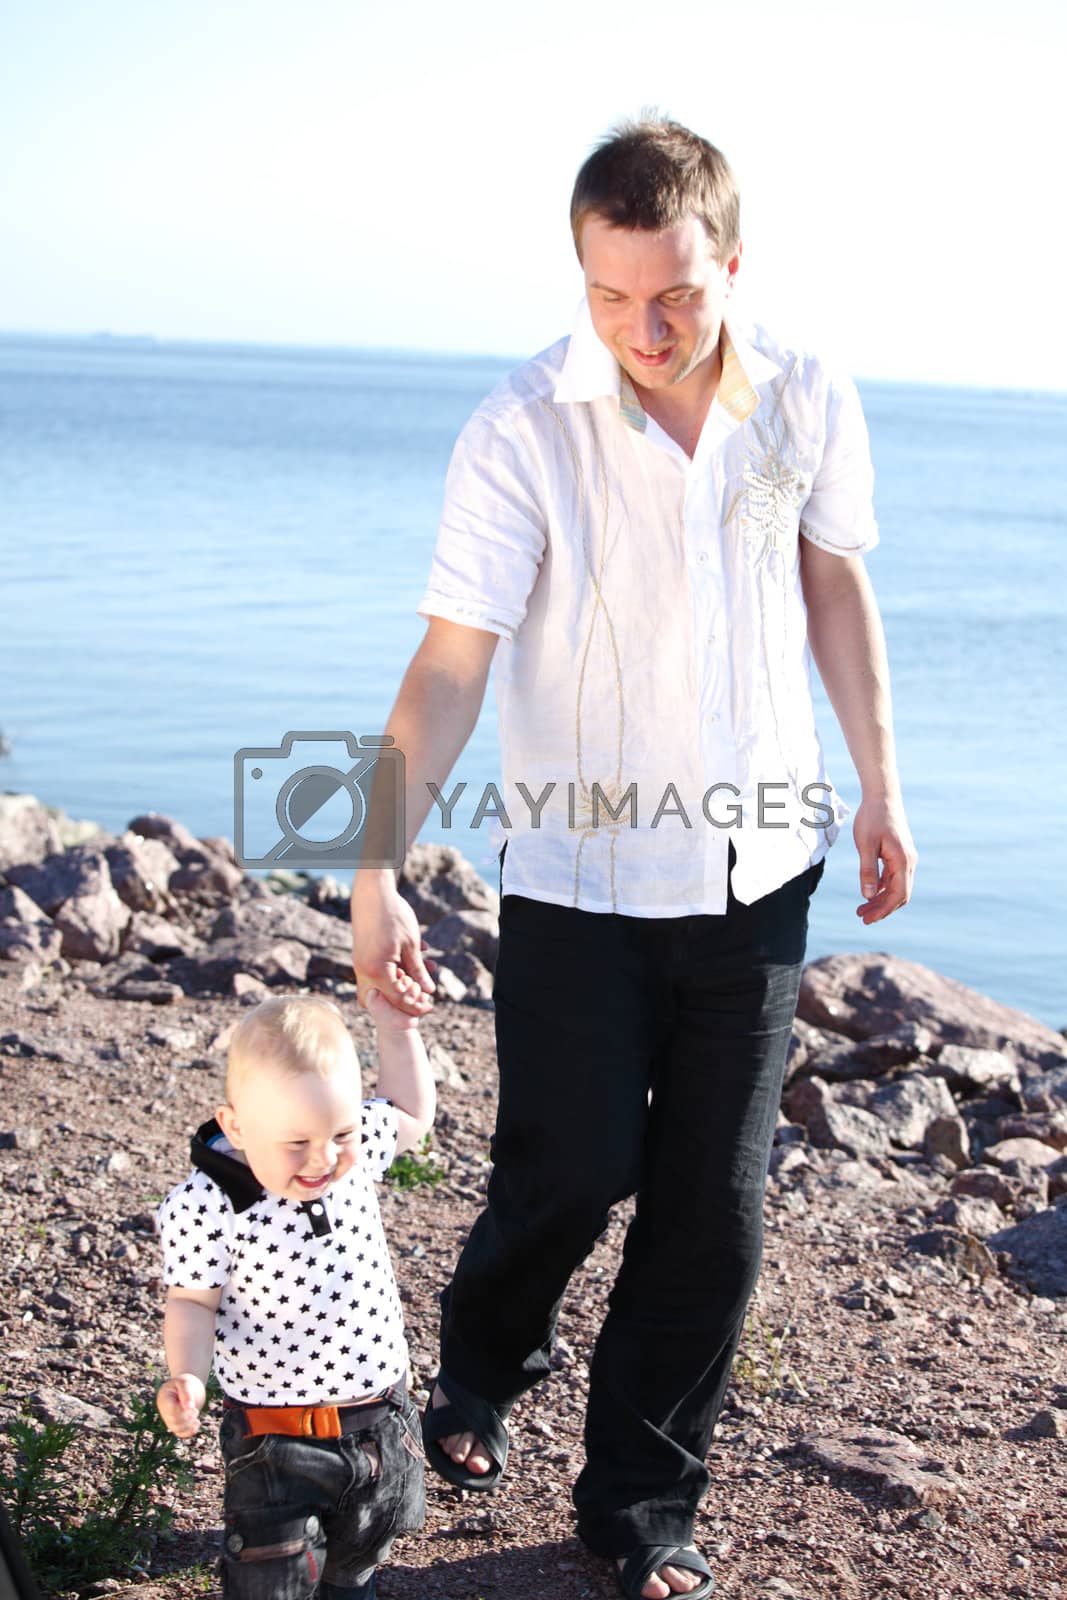 Royalty free image of family walk by Yellowj